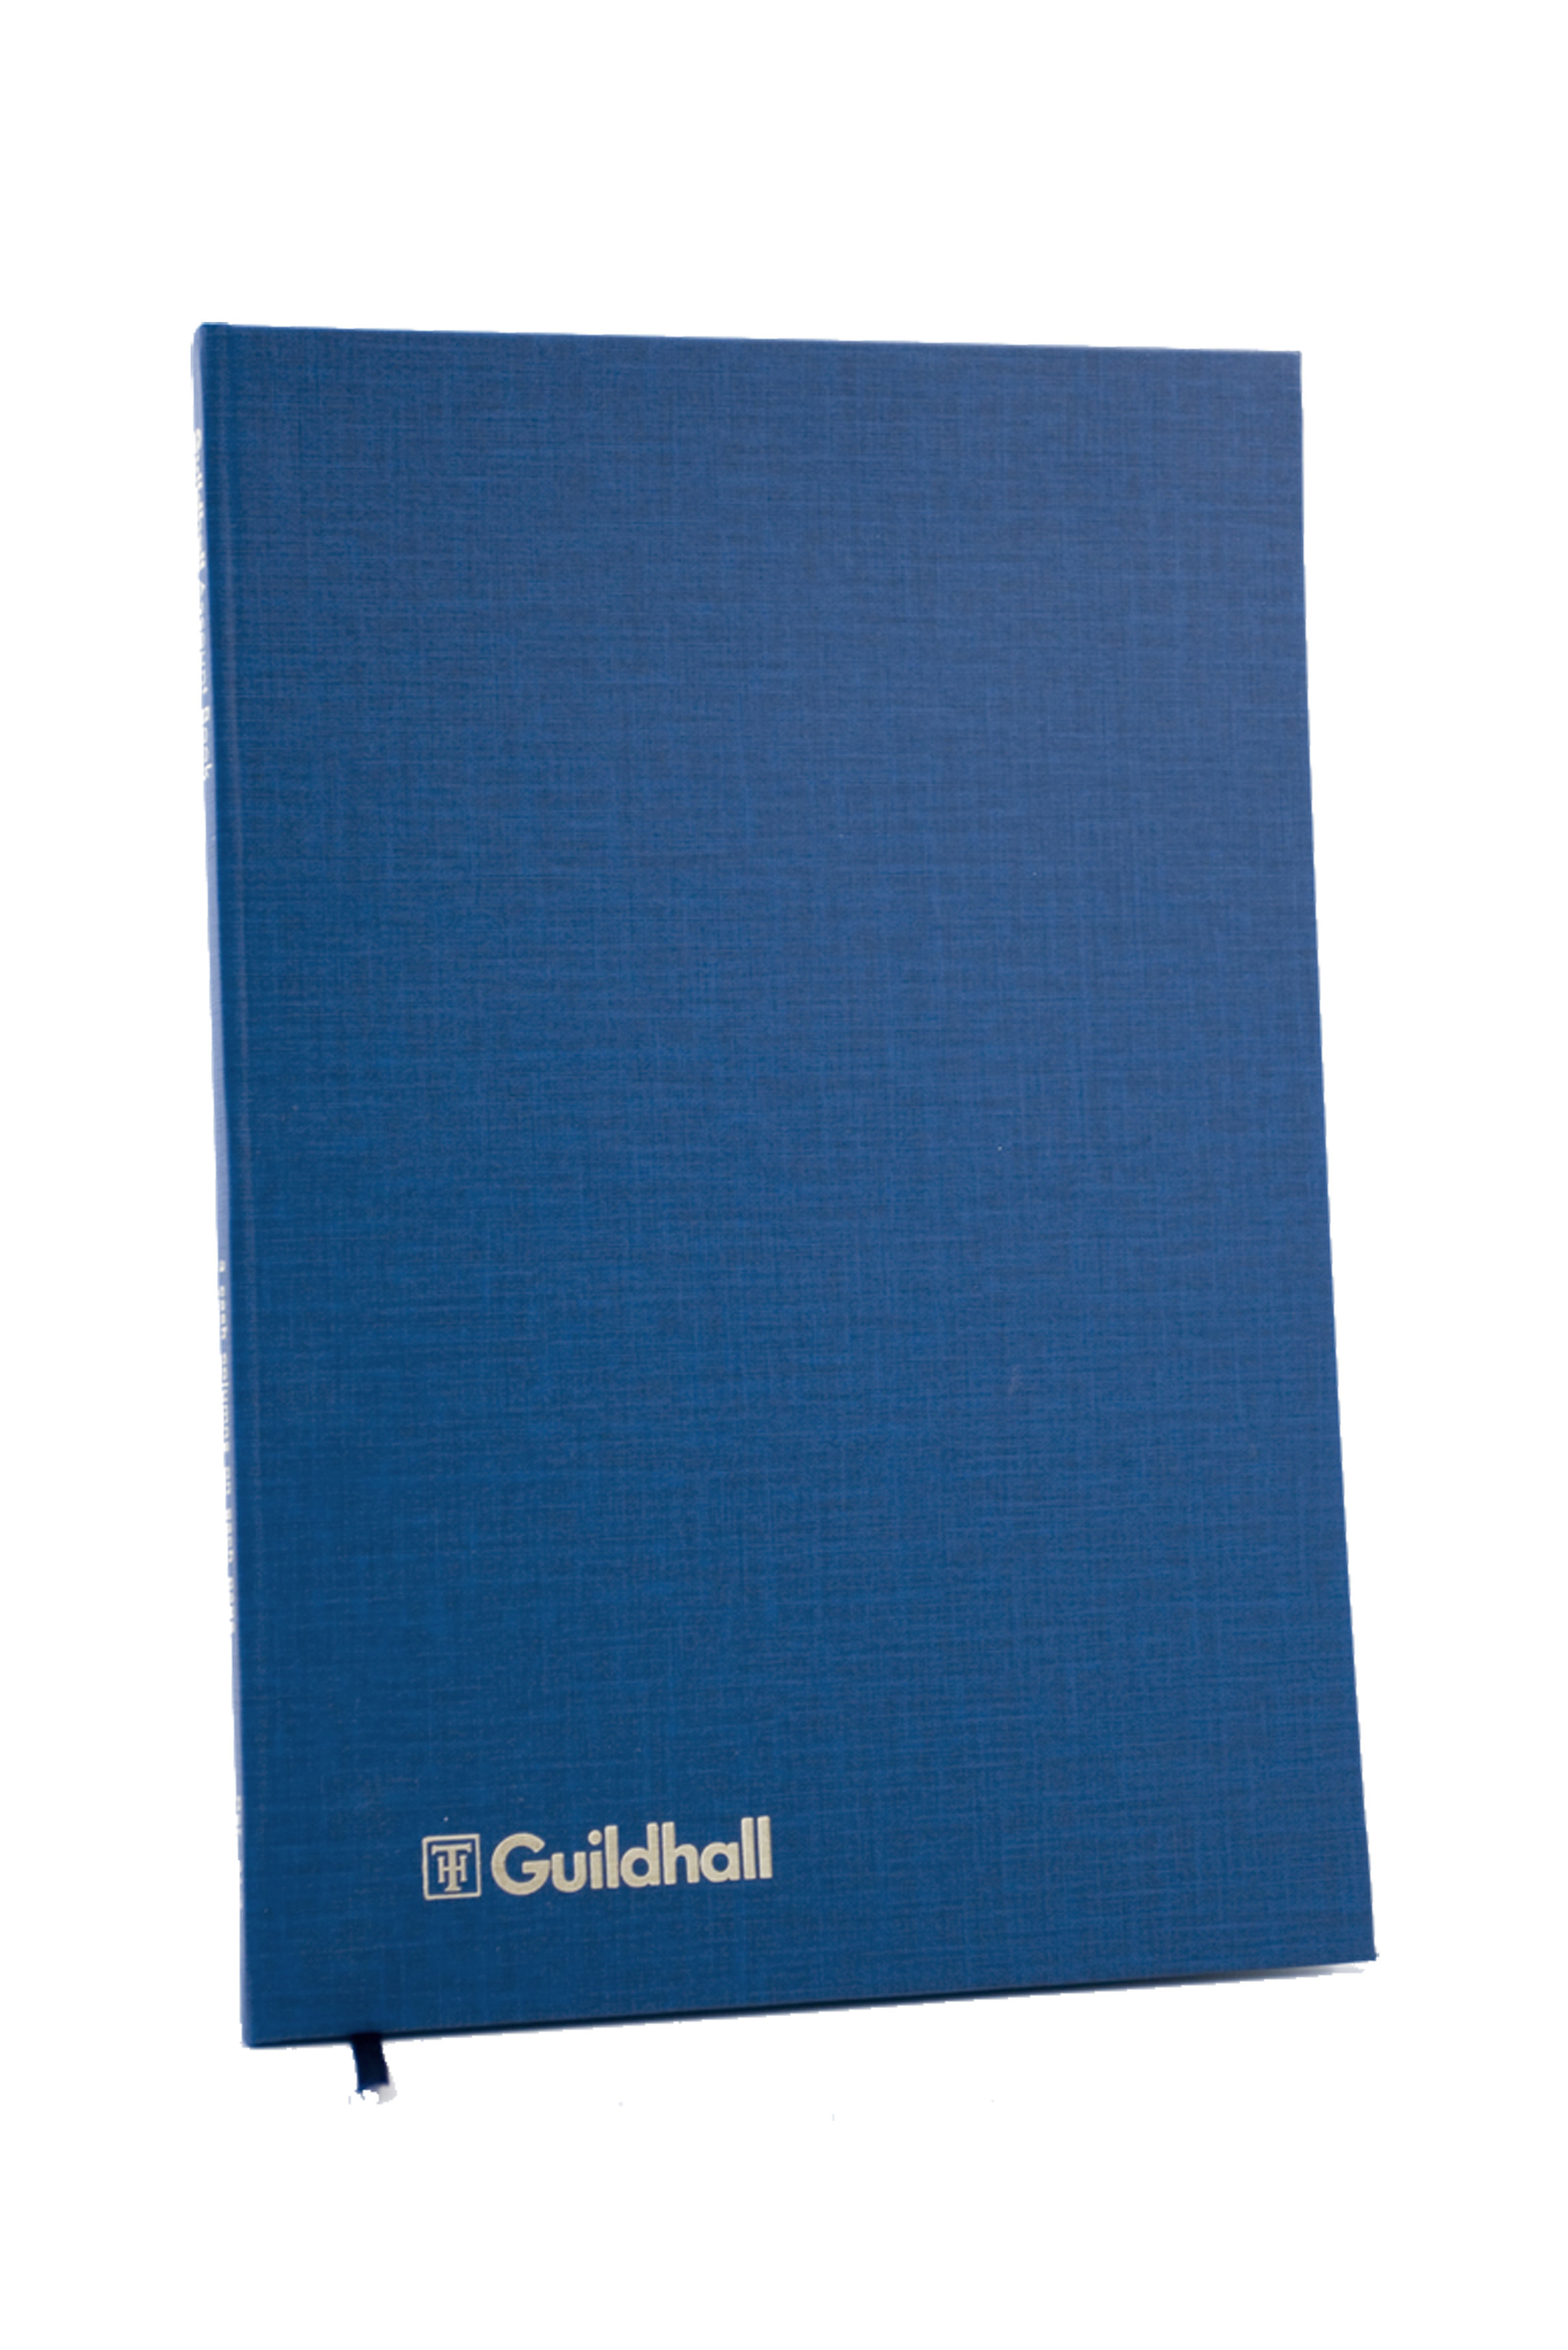 Guildhall Account Book 31 Series 2 Col